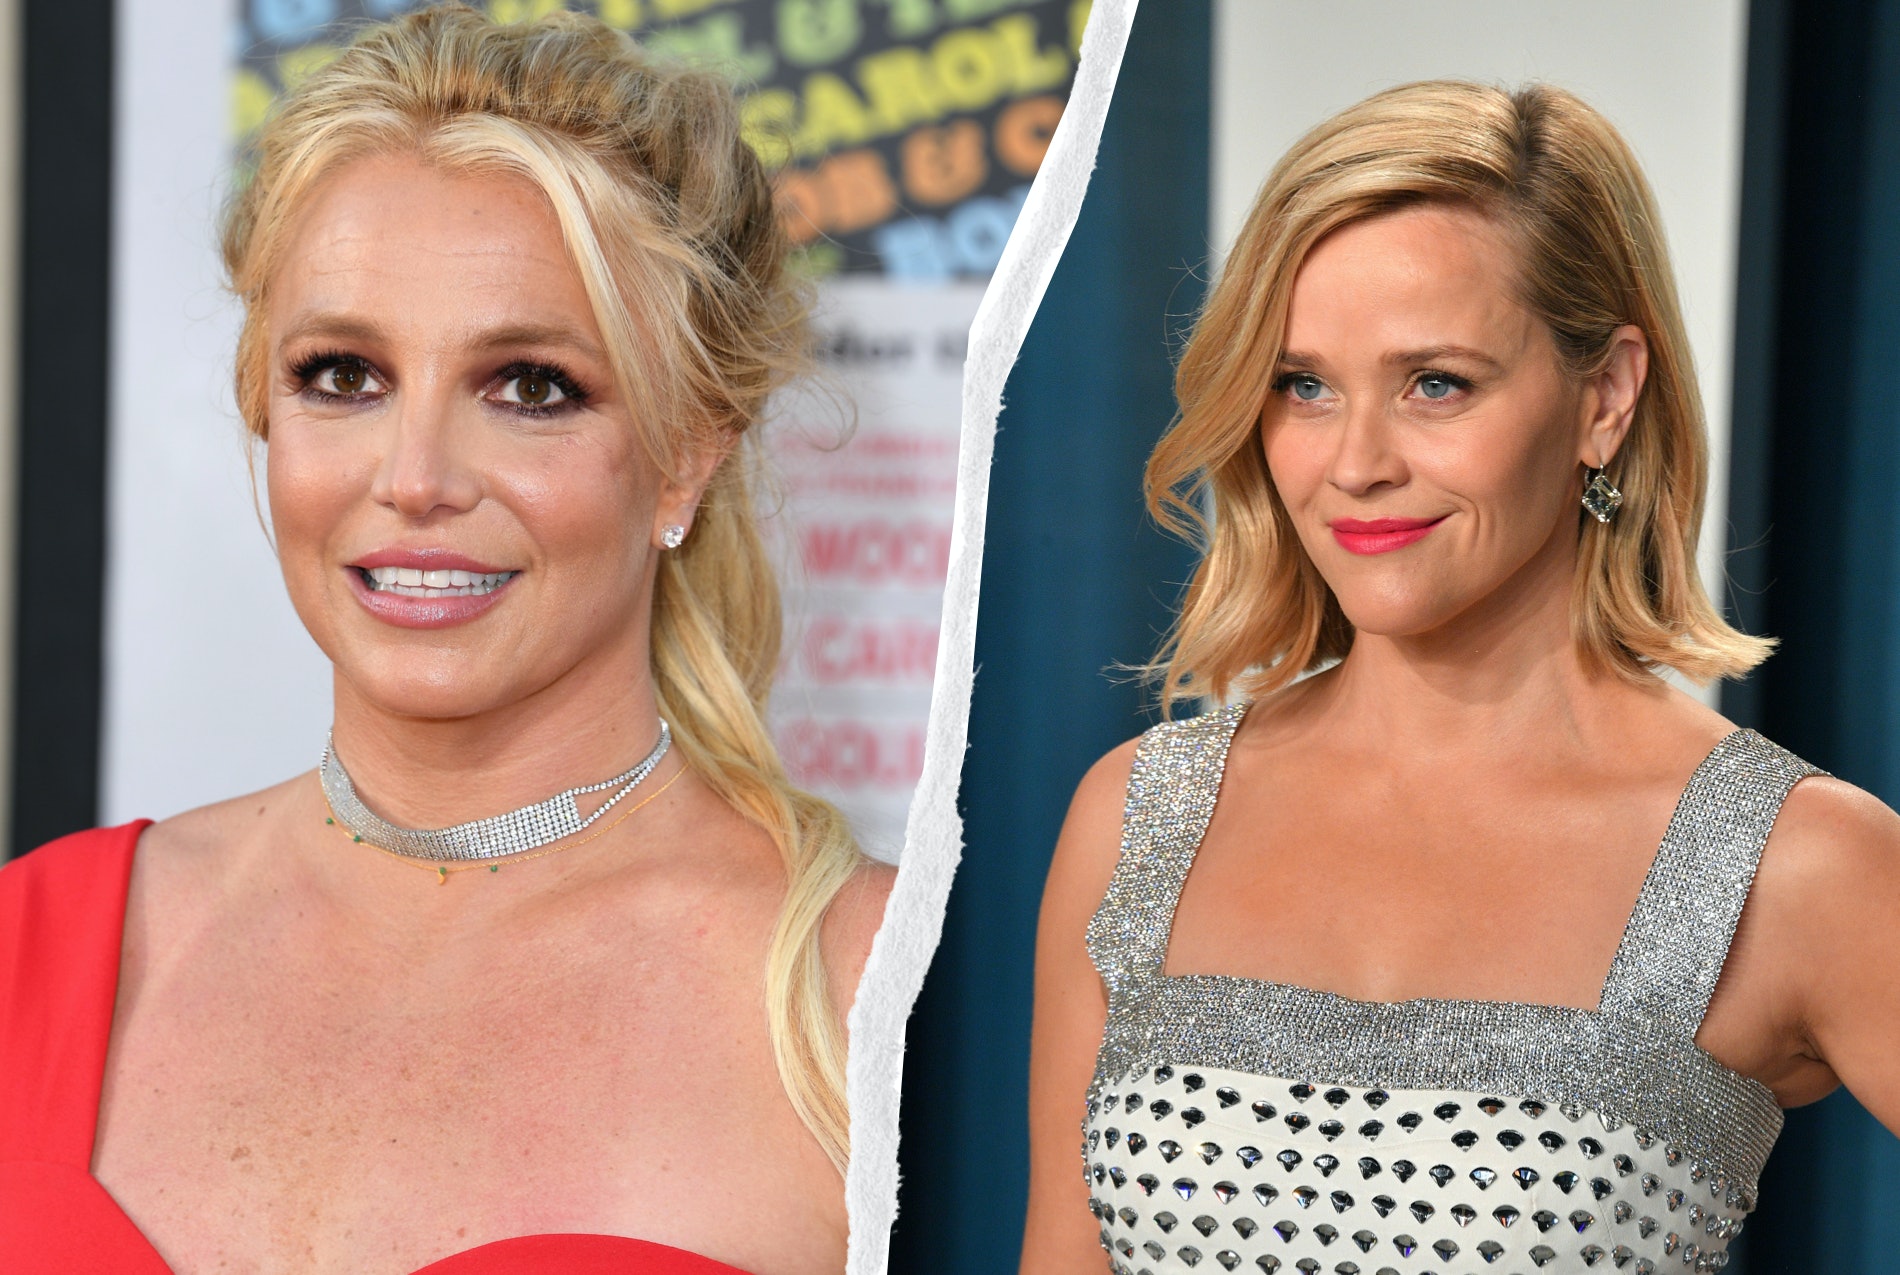 Britney Spears pagó el mayor cumplido a Reese Witherspoon